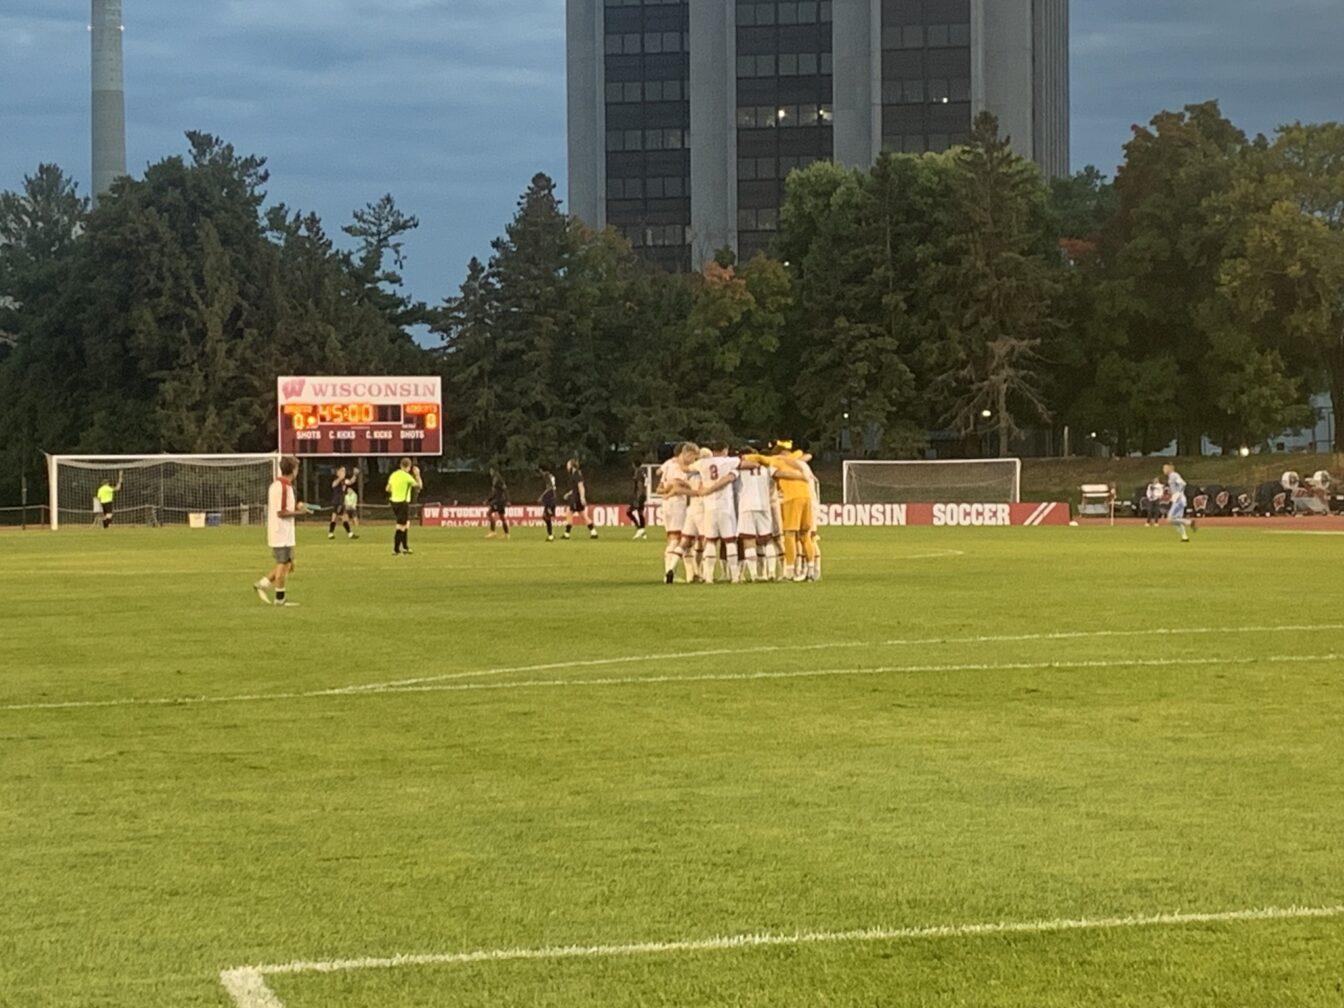 Men’s soccer: Wisconsin fights back to earn 1-1 tie at Michigan